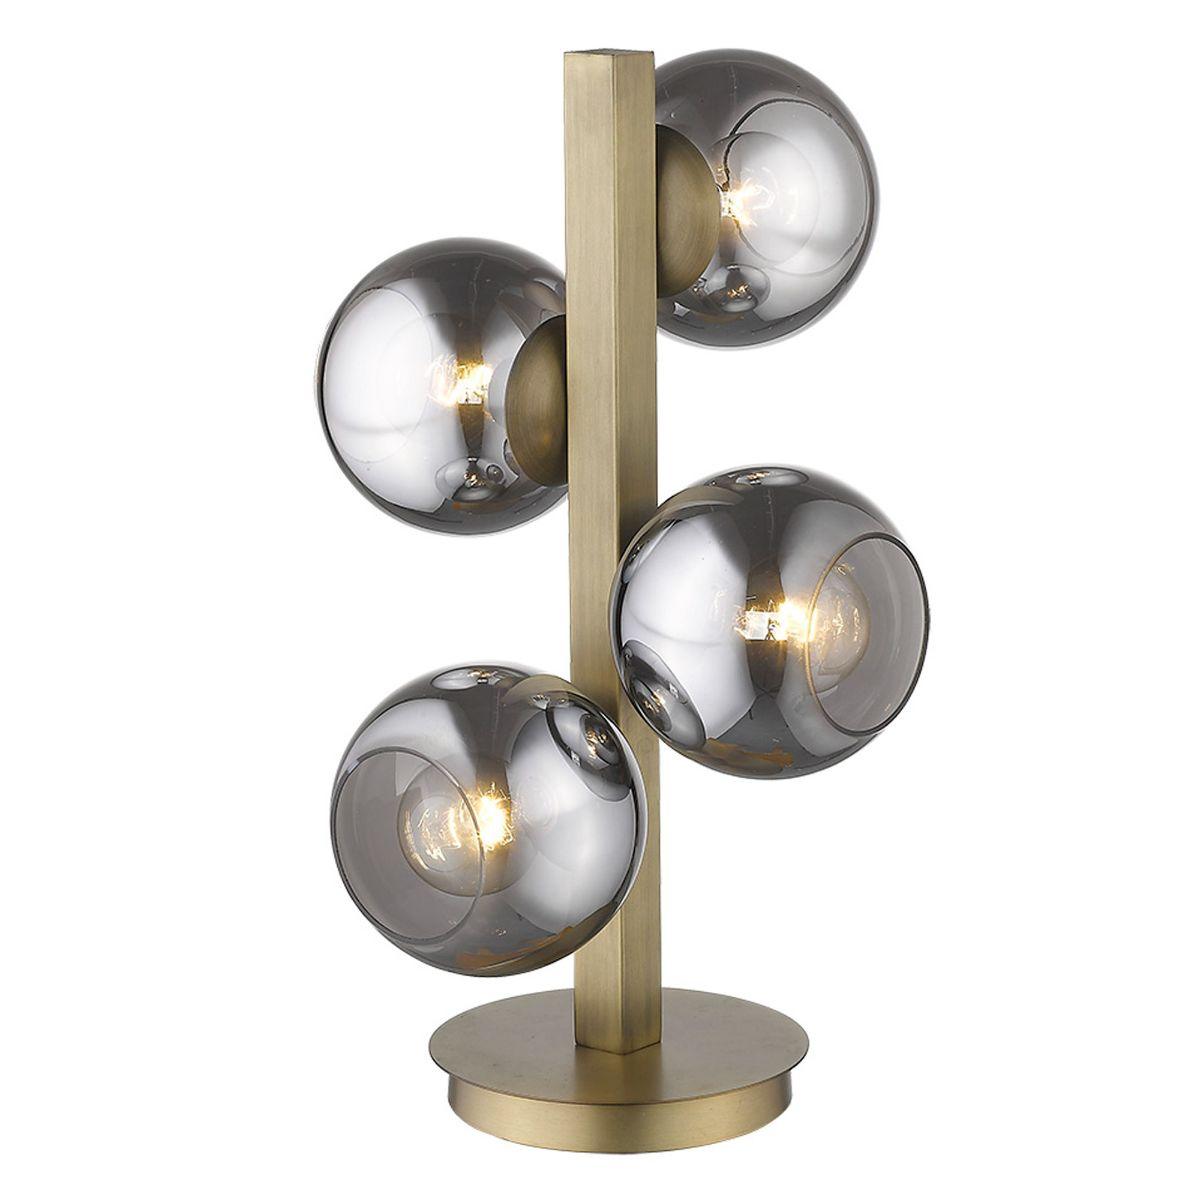 Lunette 4 Lights Table Lamp Smoke Glass with Aged Brass Finish